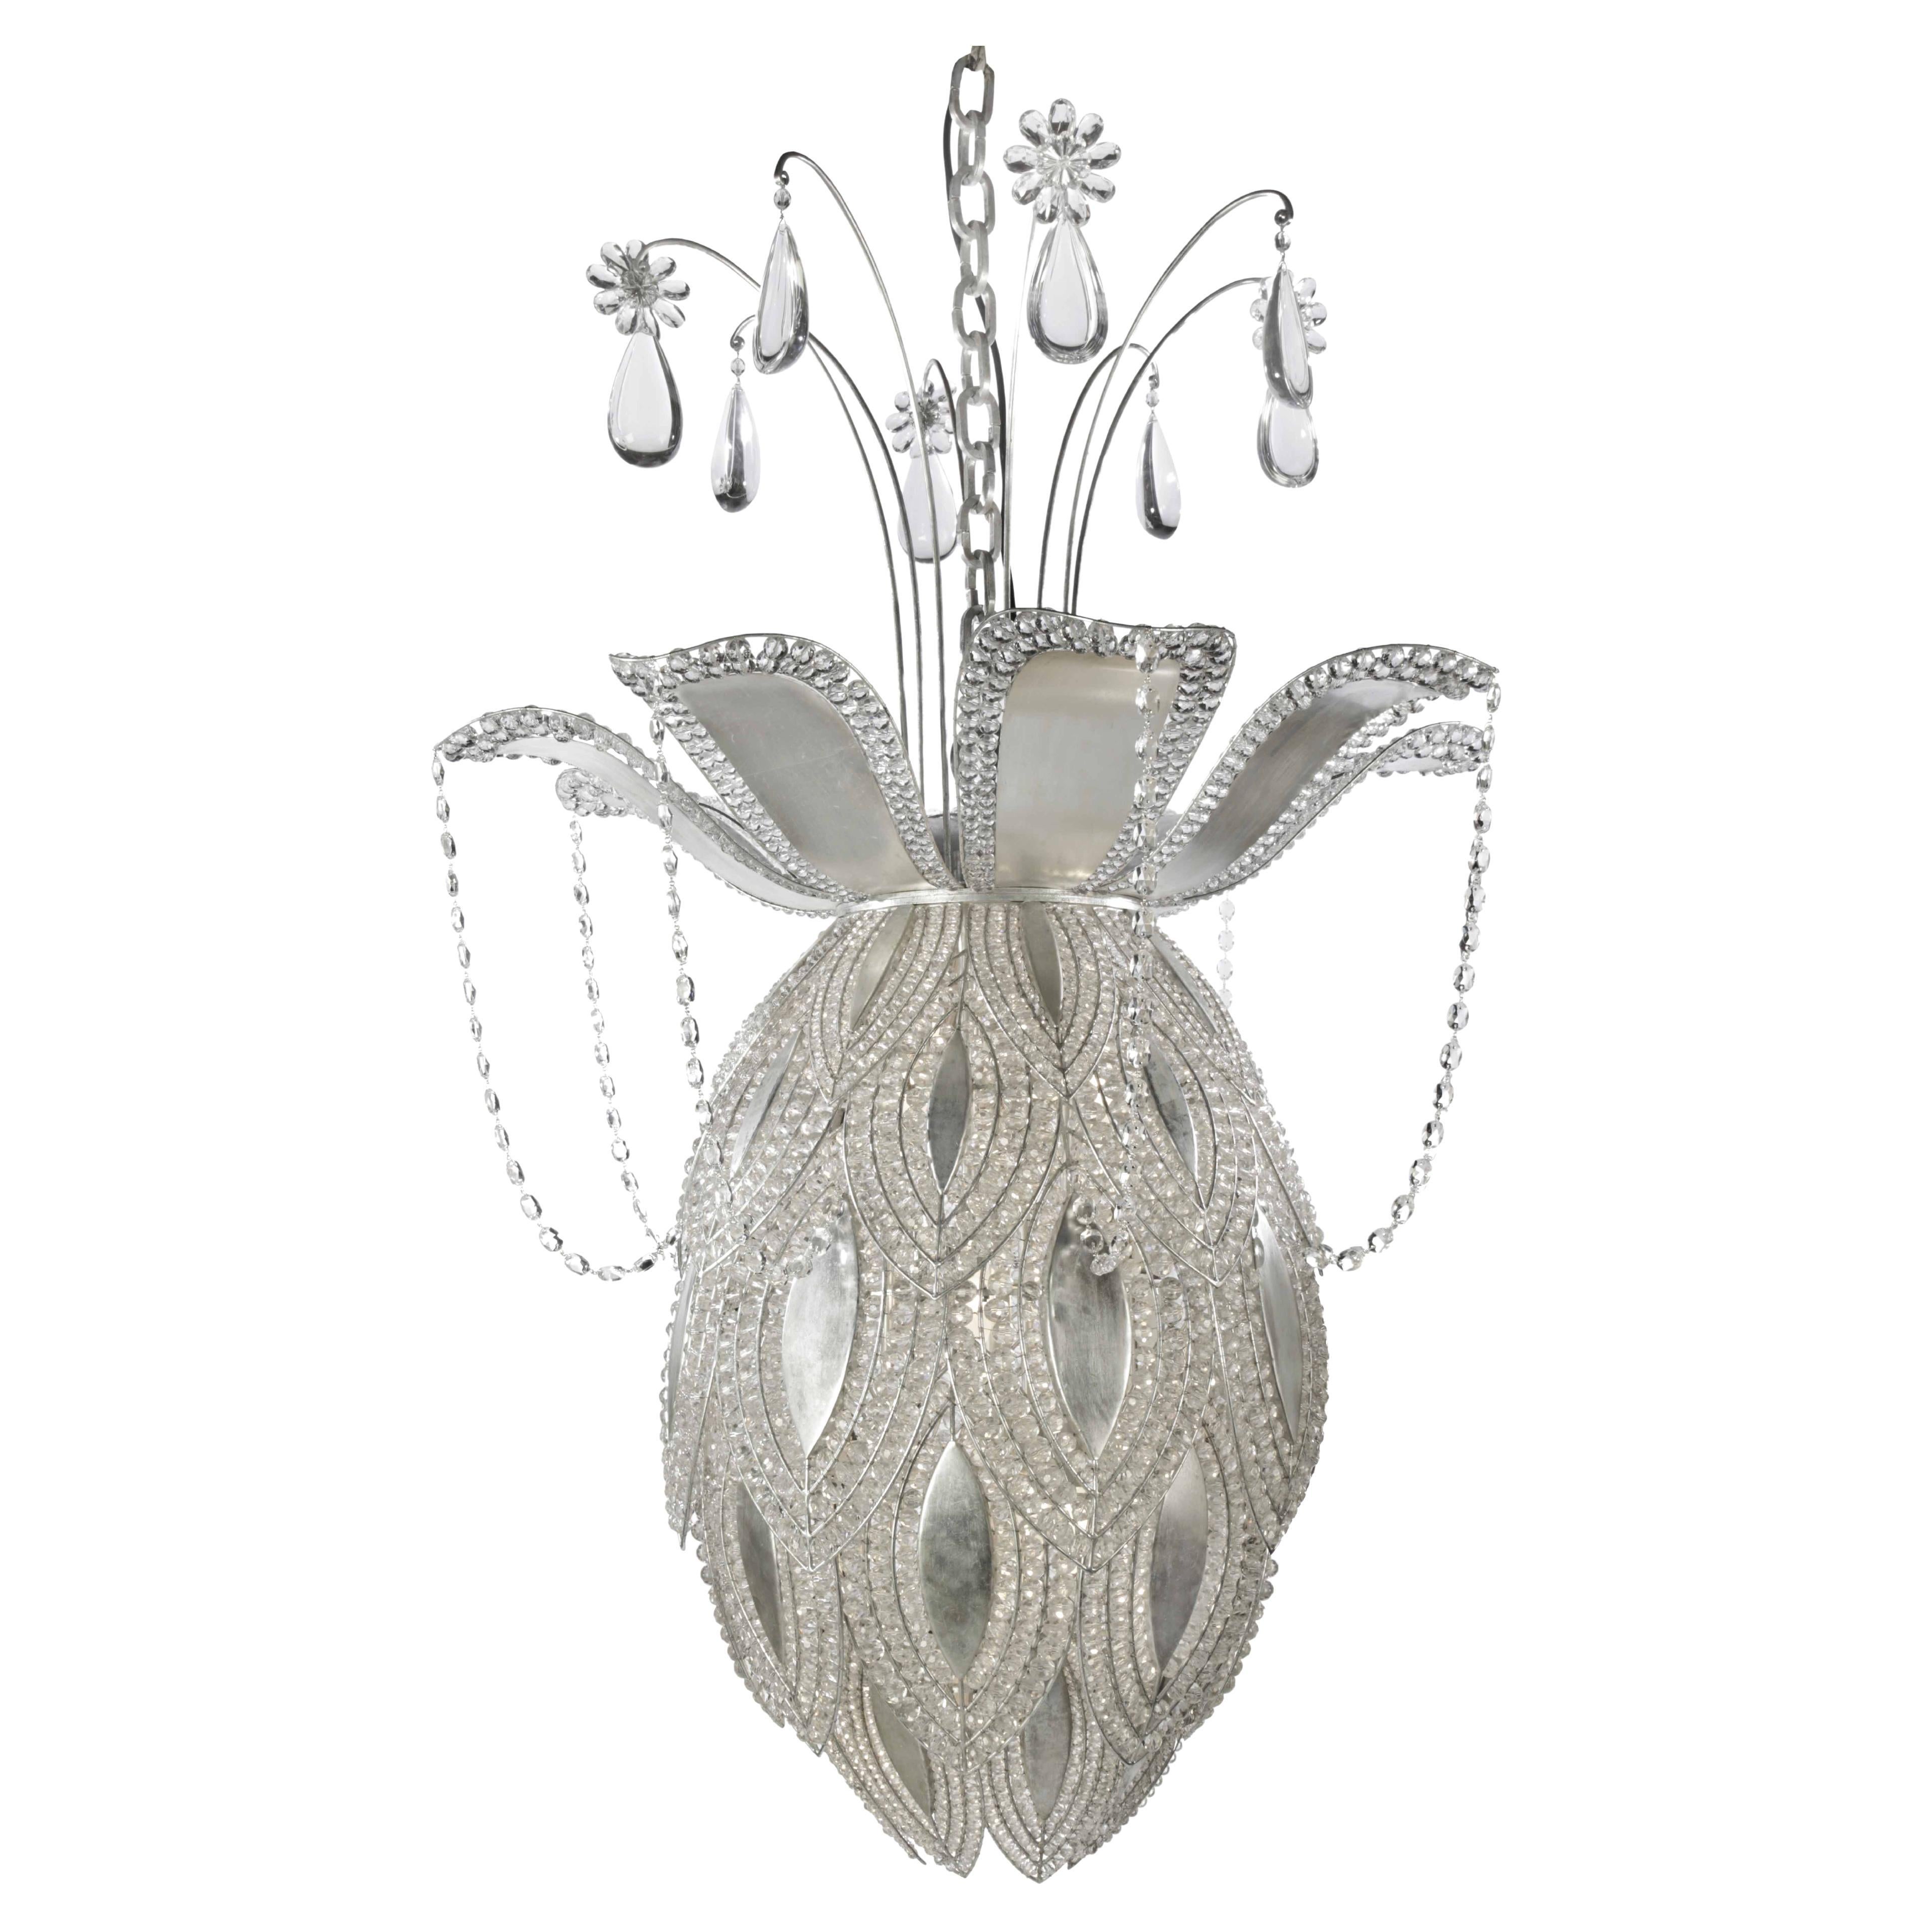 LU-FE-14652-10 Maison Baguès chandelier, 10 lights.
Various finish possible: leaf gilt gold strong patina, leaf gilt silver, black paint.

Iron and crystal.

Price is for leaf gilt gold finish - light patina.

UL listing possible on request